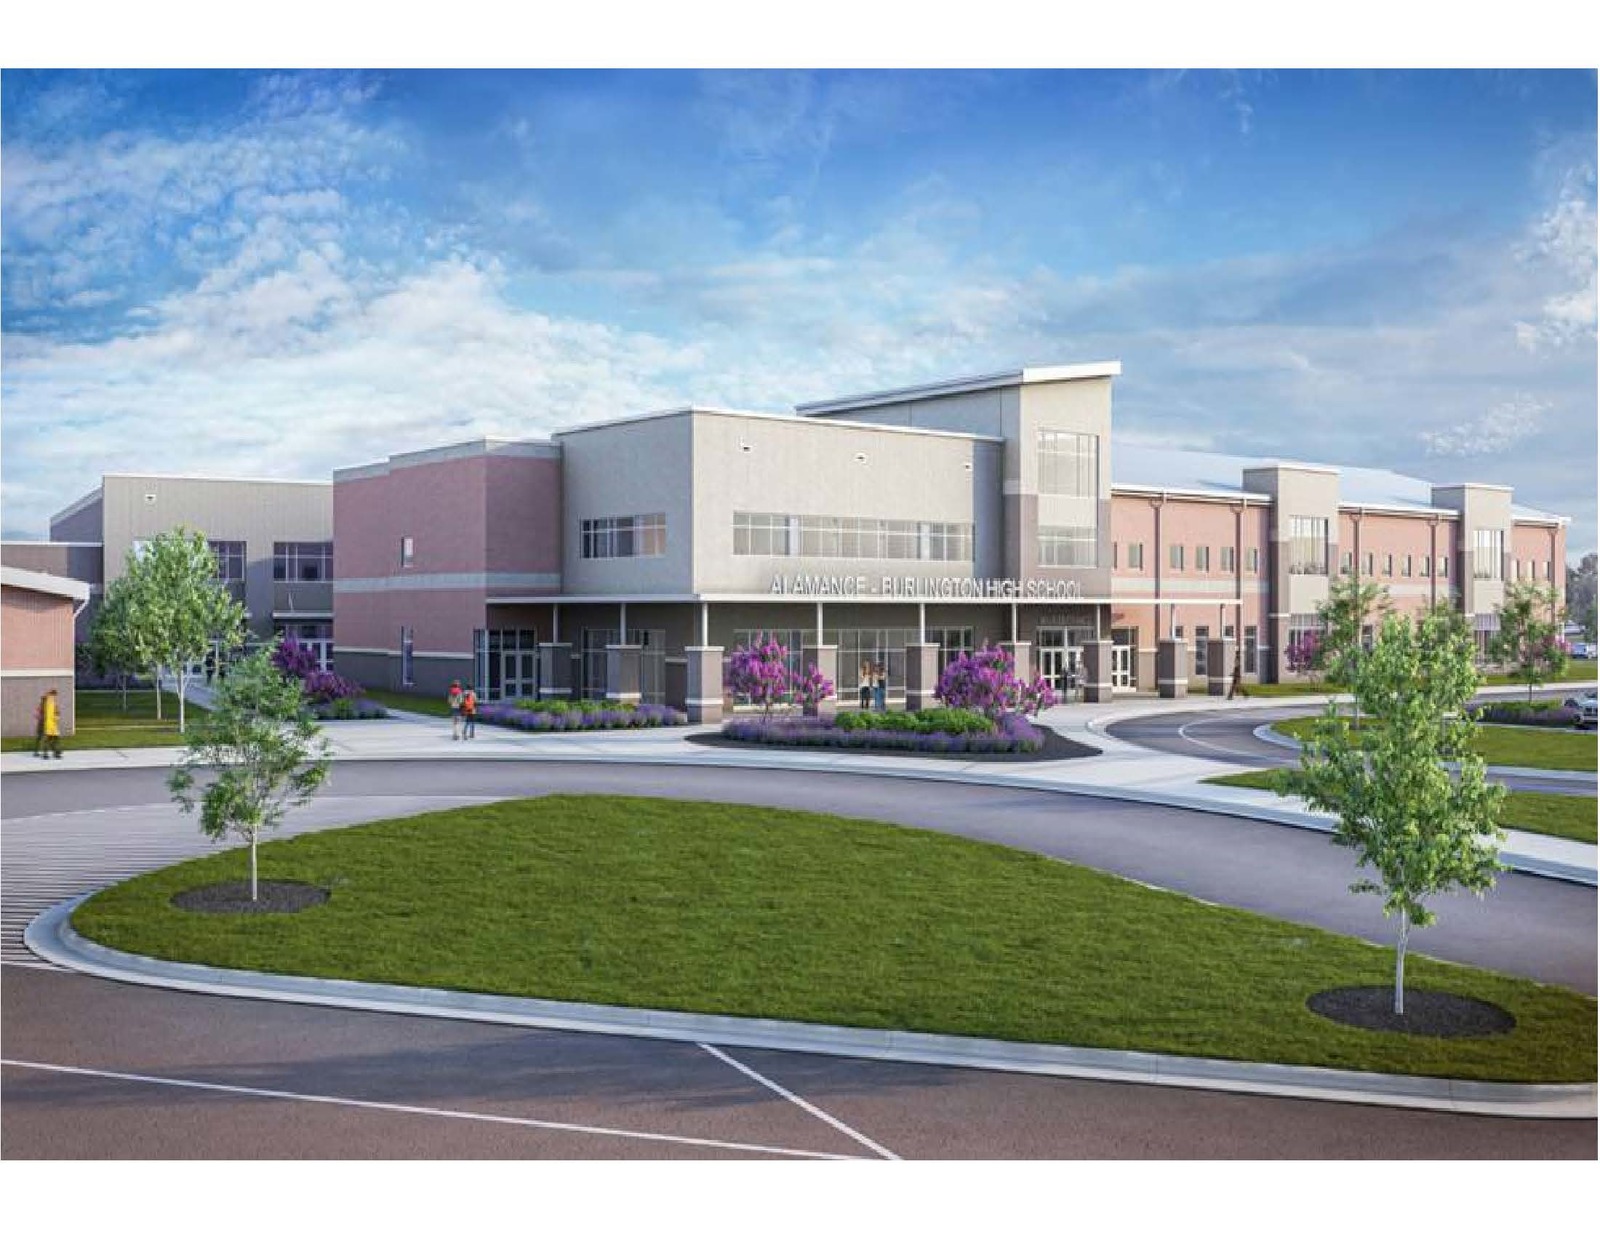 Picture is of an artist rendering of the front of the new Southeast Alamance High School